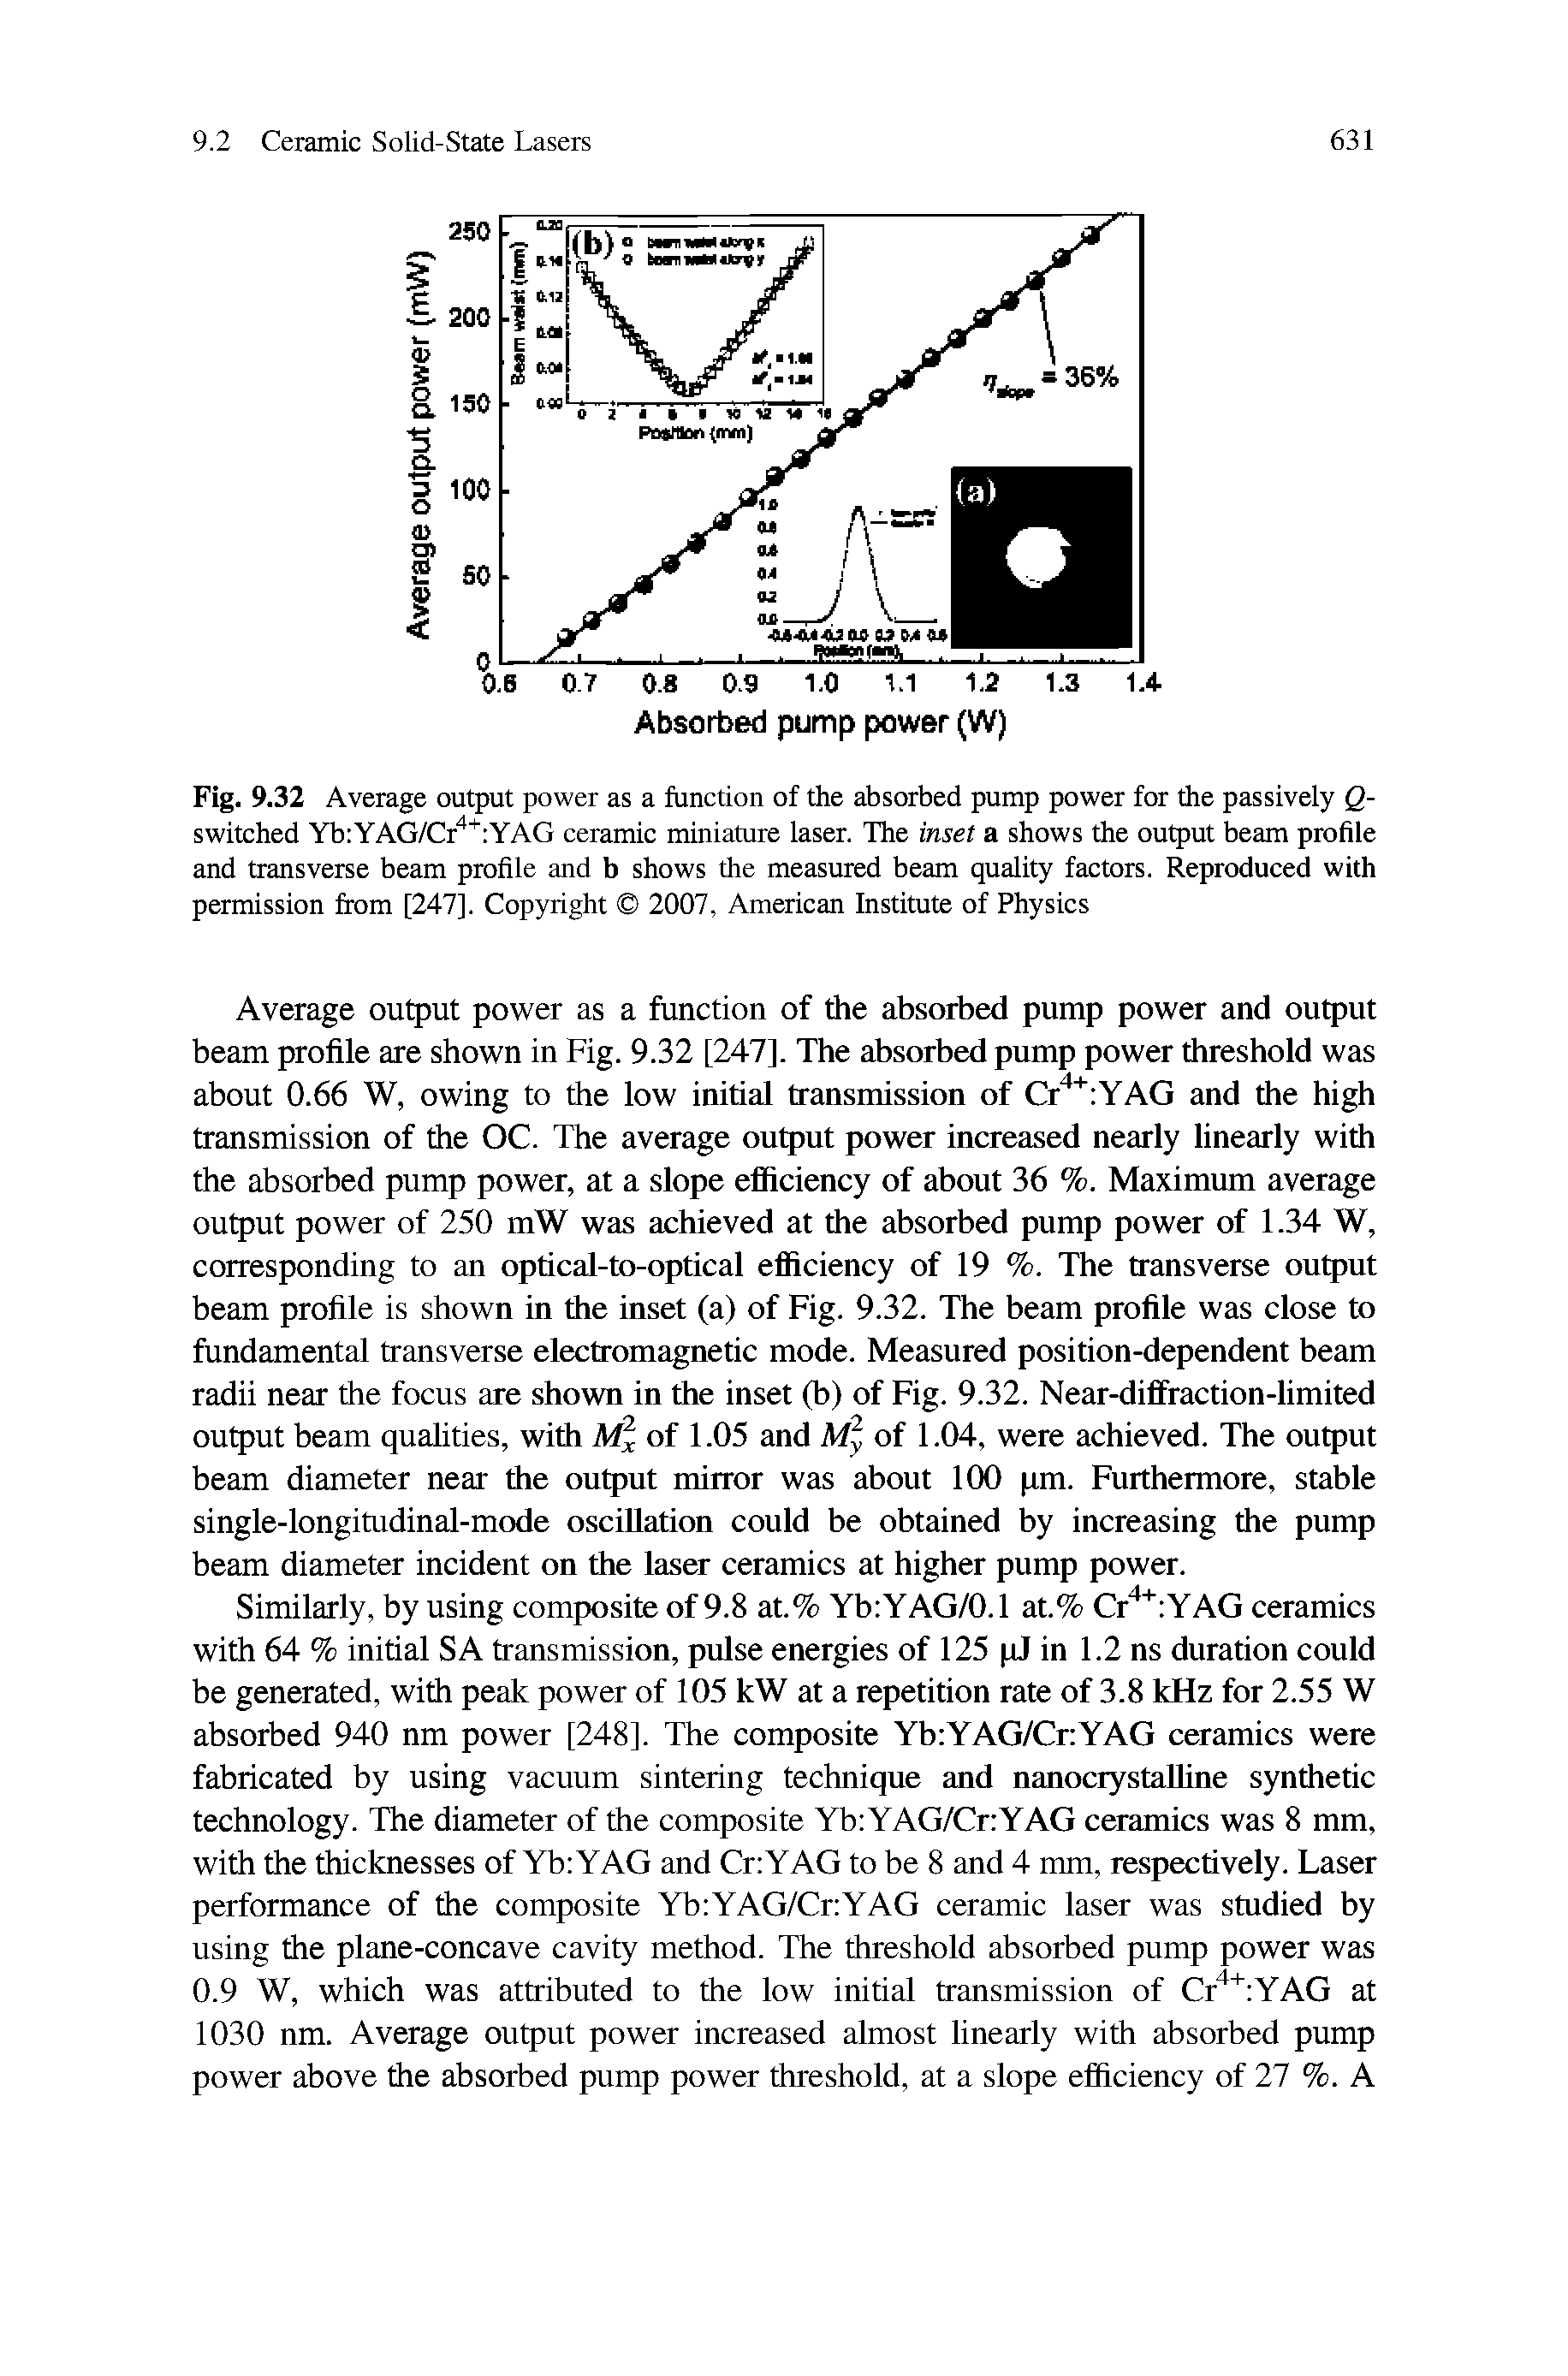 Fig. 9.32 Average output power as a function of the absorbed pump power for the passively Q-switched Yb YAG/Cr" YAG ceramic miniature laser. The inset a shows the output beam profile and transverse beam profile and b shows the measured beam quality factors. Reproduced with permission from [247]. Copyright 2007, American Institute of Physics...